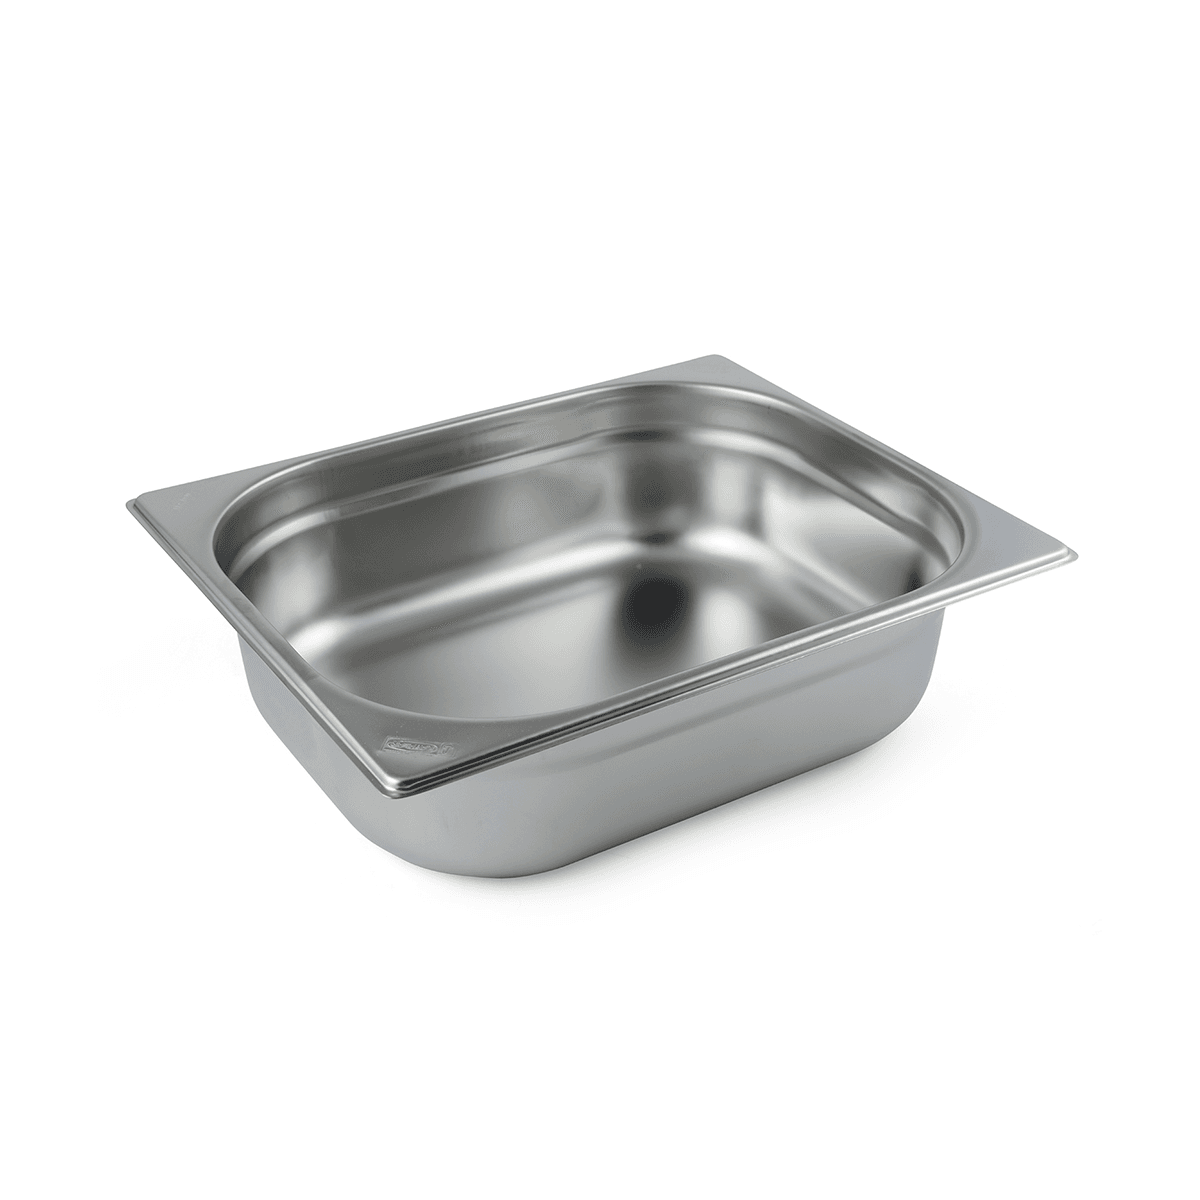 Kayalar Stainless Steel Gastronorm Container GN 1/2-100 mm Silver Stainless Steel